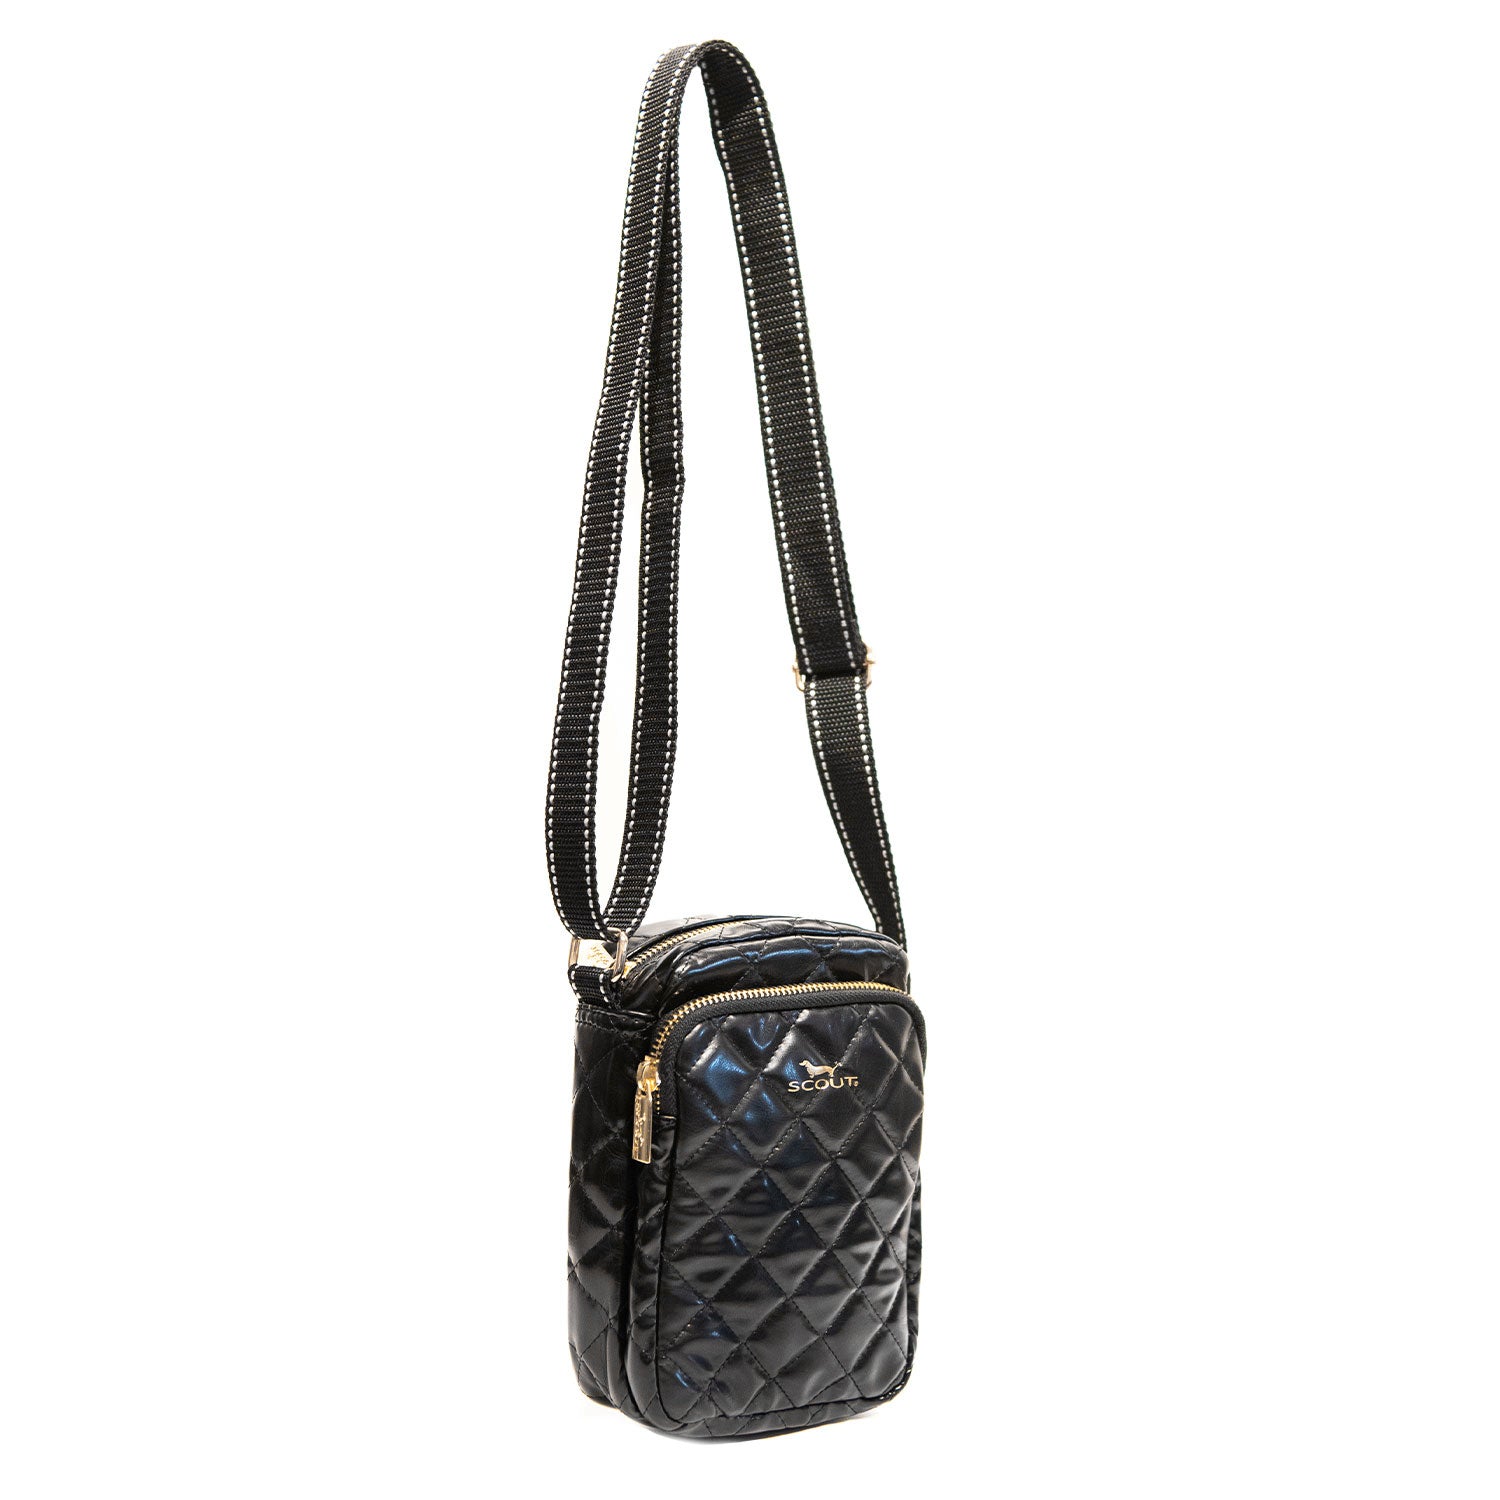 The Micromanager Crossbody Bag